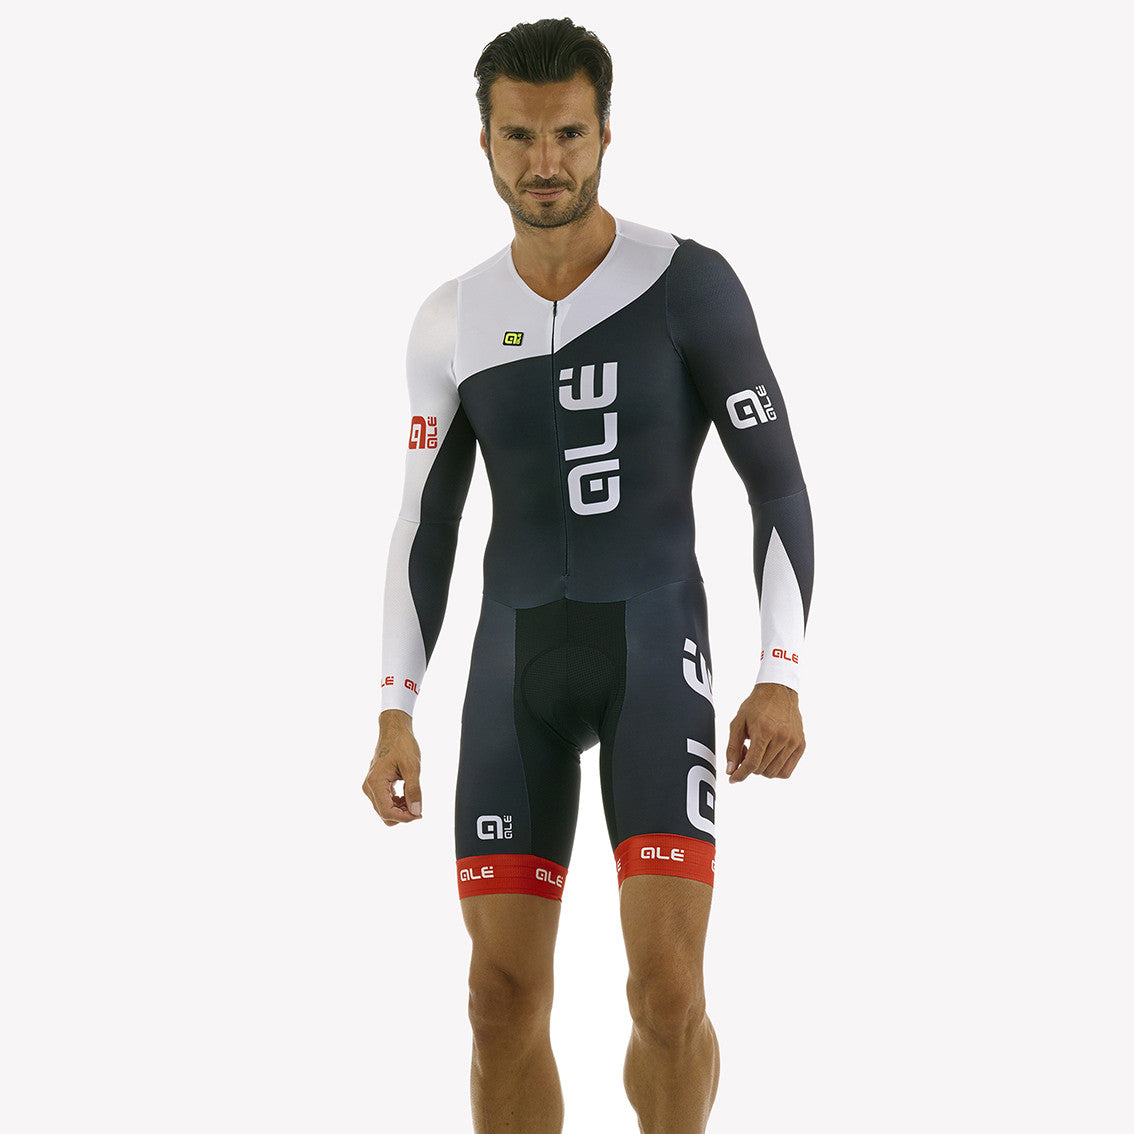 cycling speed suit men's